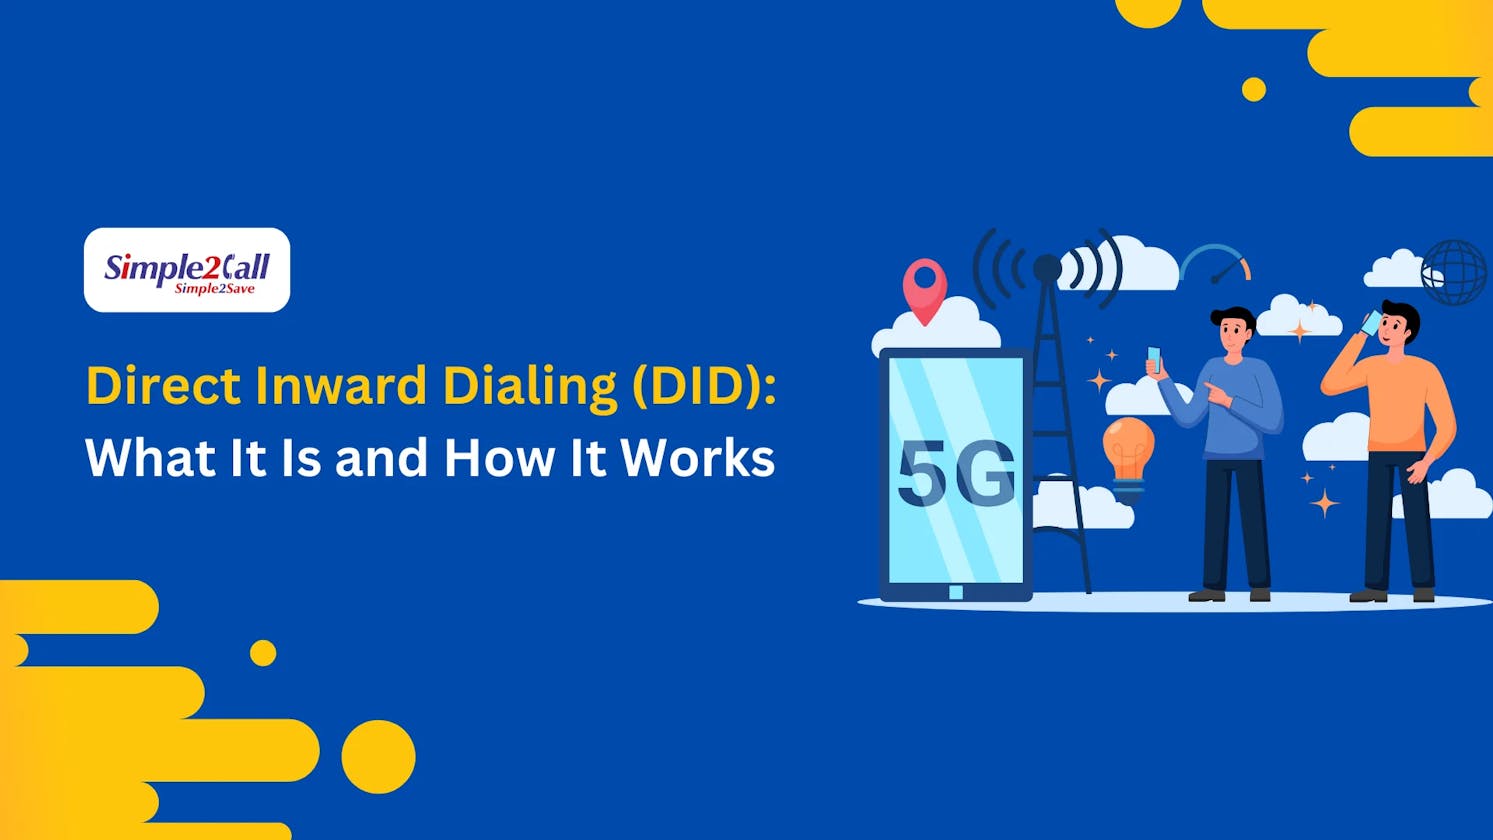 Direct Inward Dialling (DID): What it is and how it works